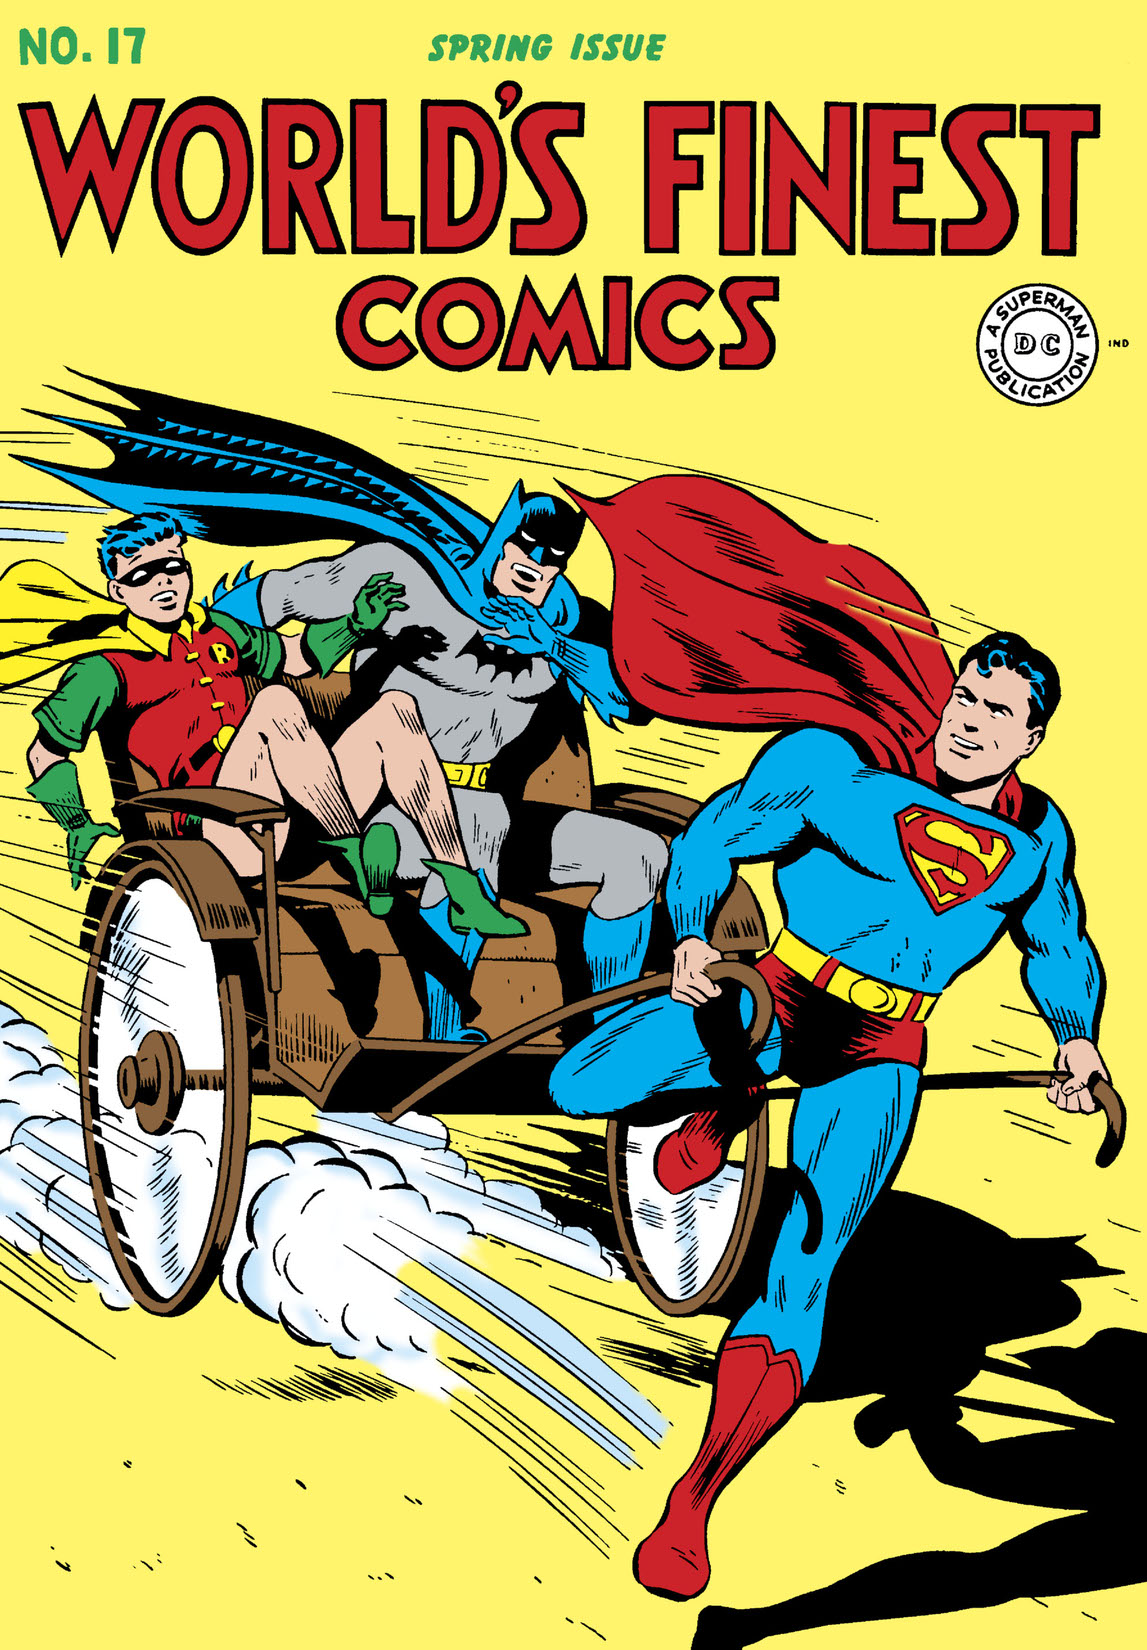 World's Finest Comics (1941-) #17 preview images